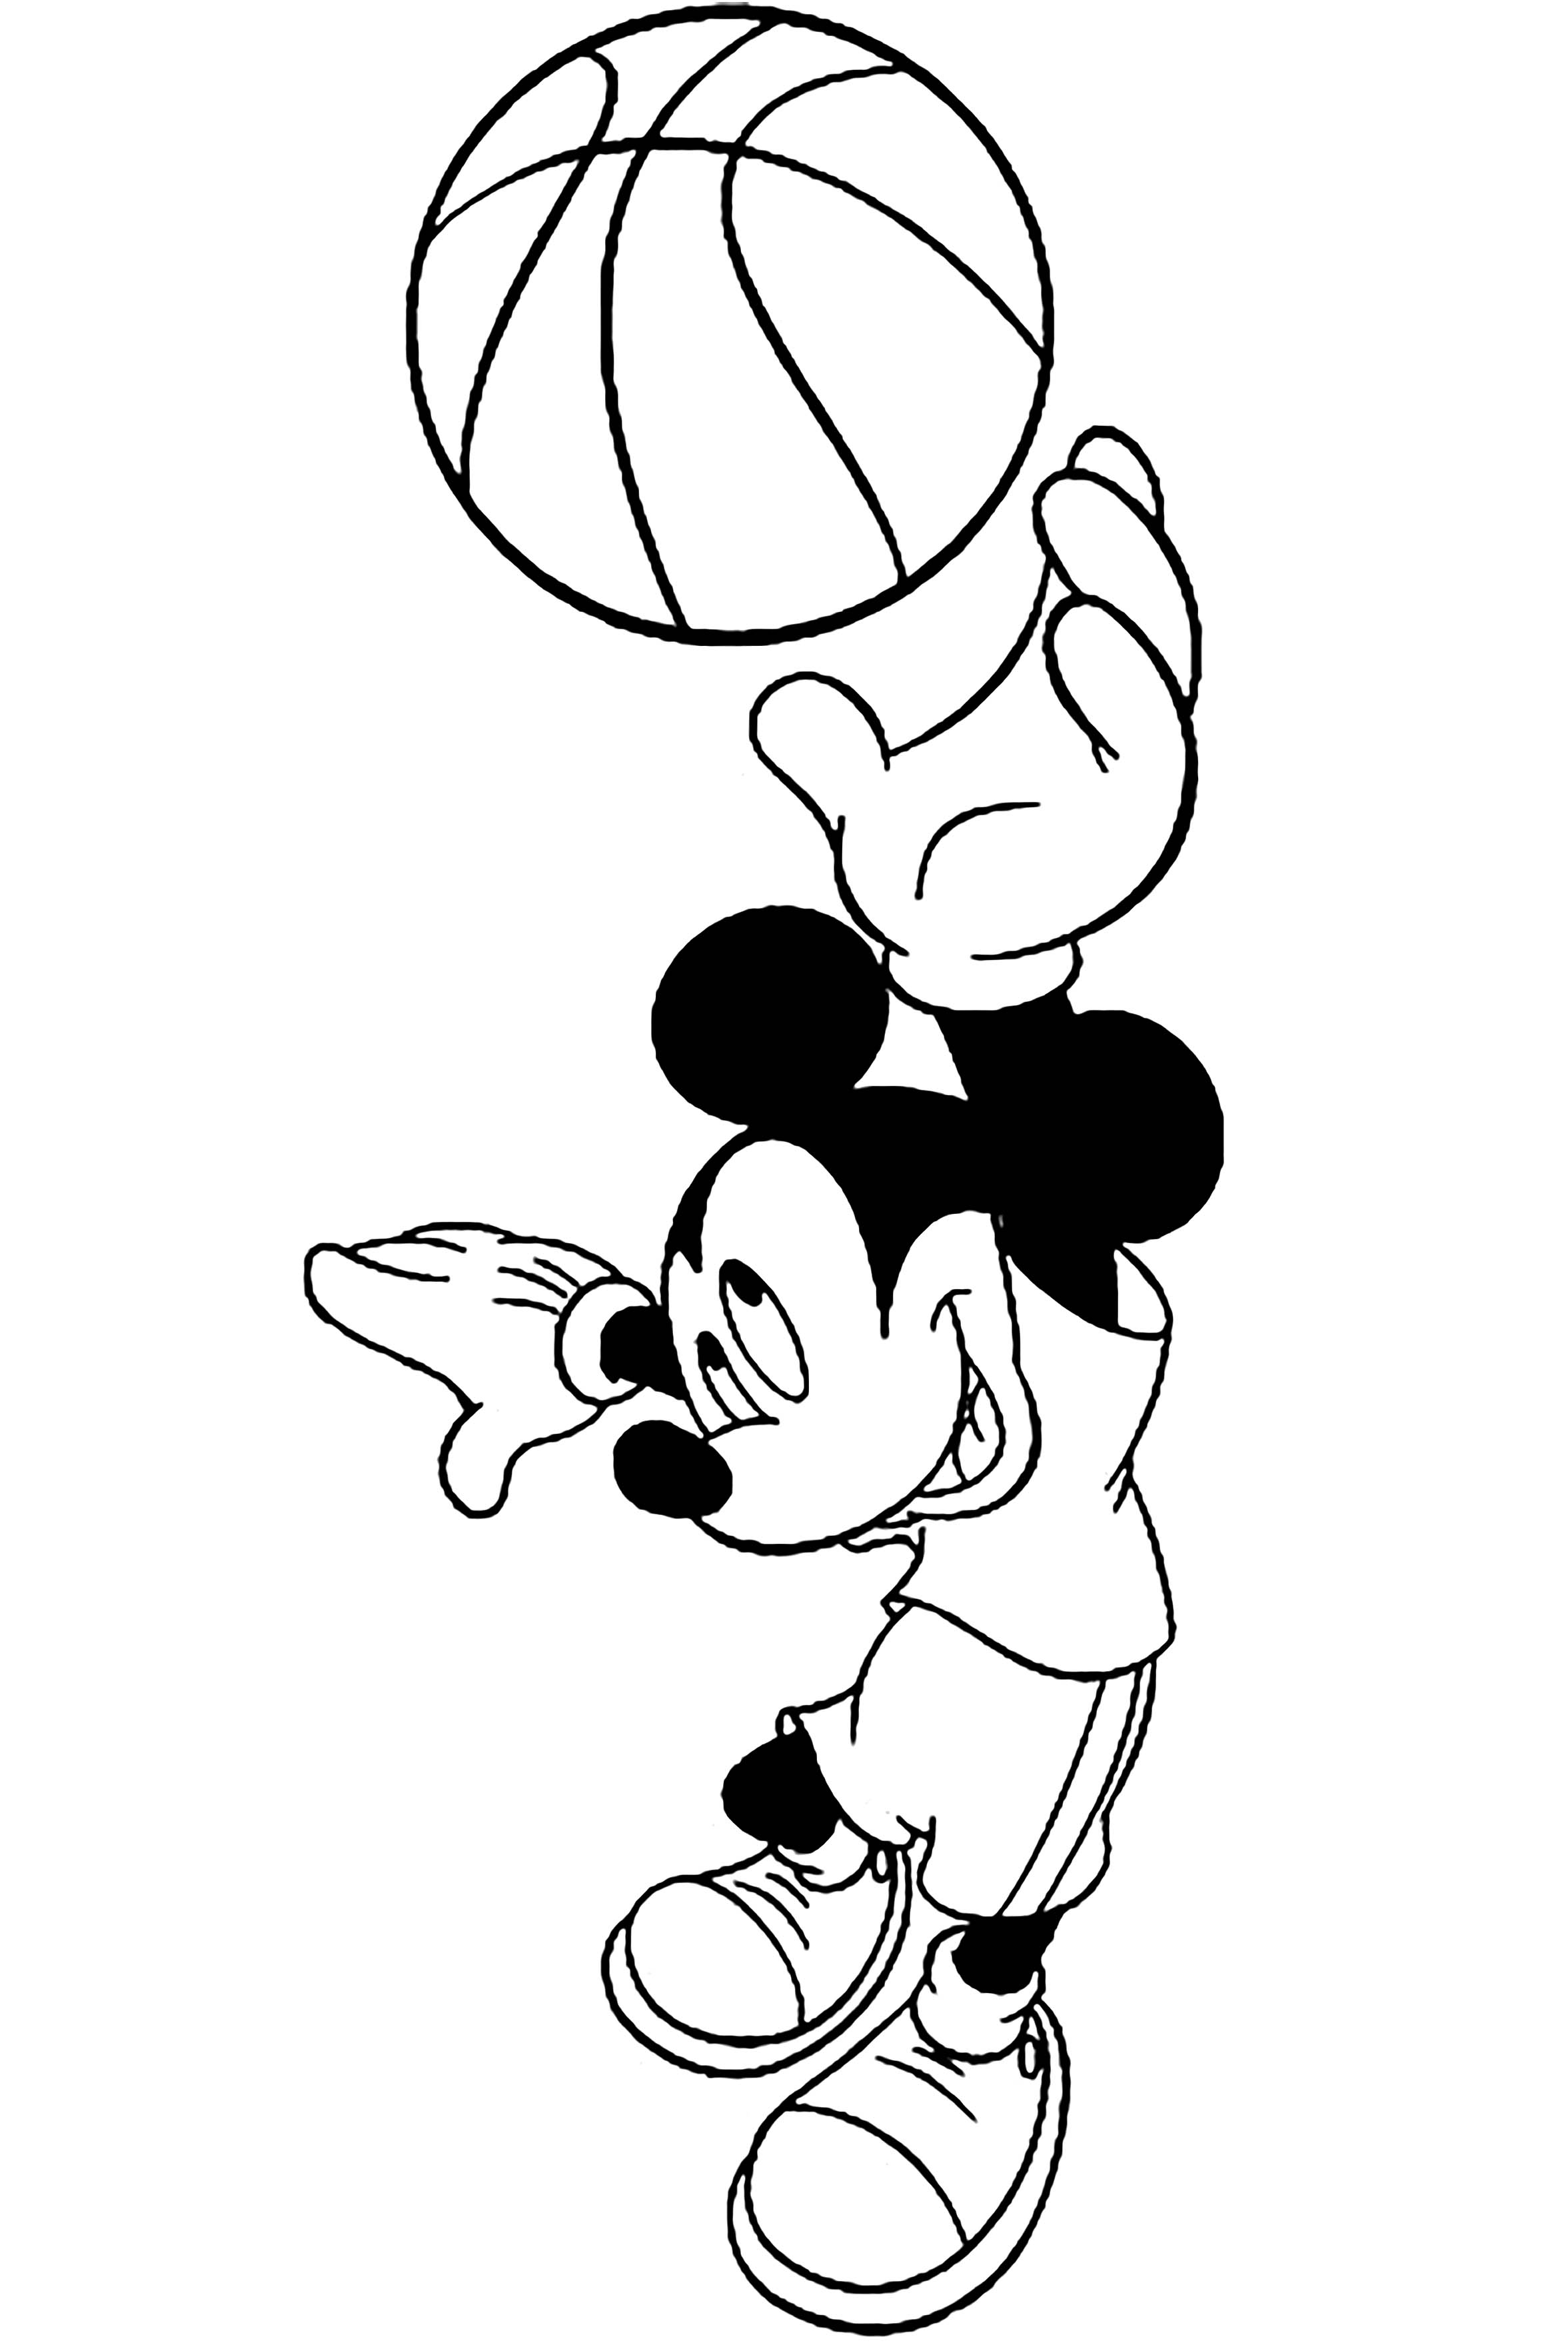 Mickey Mouse Basketball Coloring Page